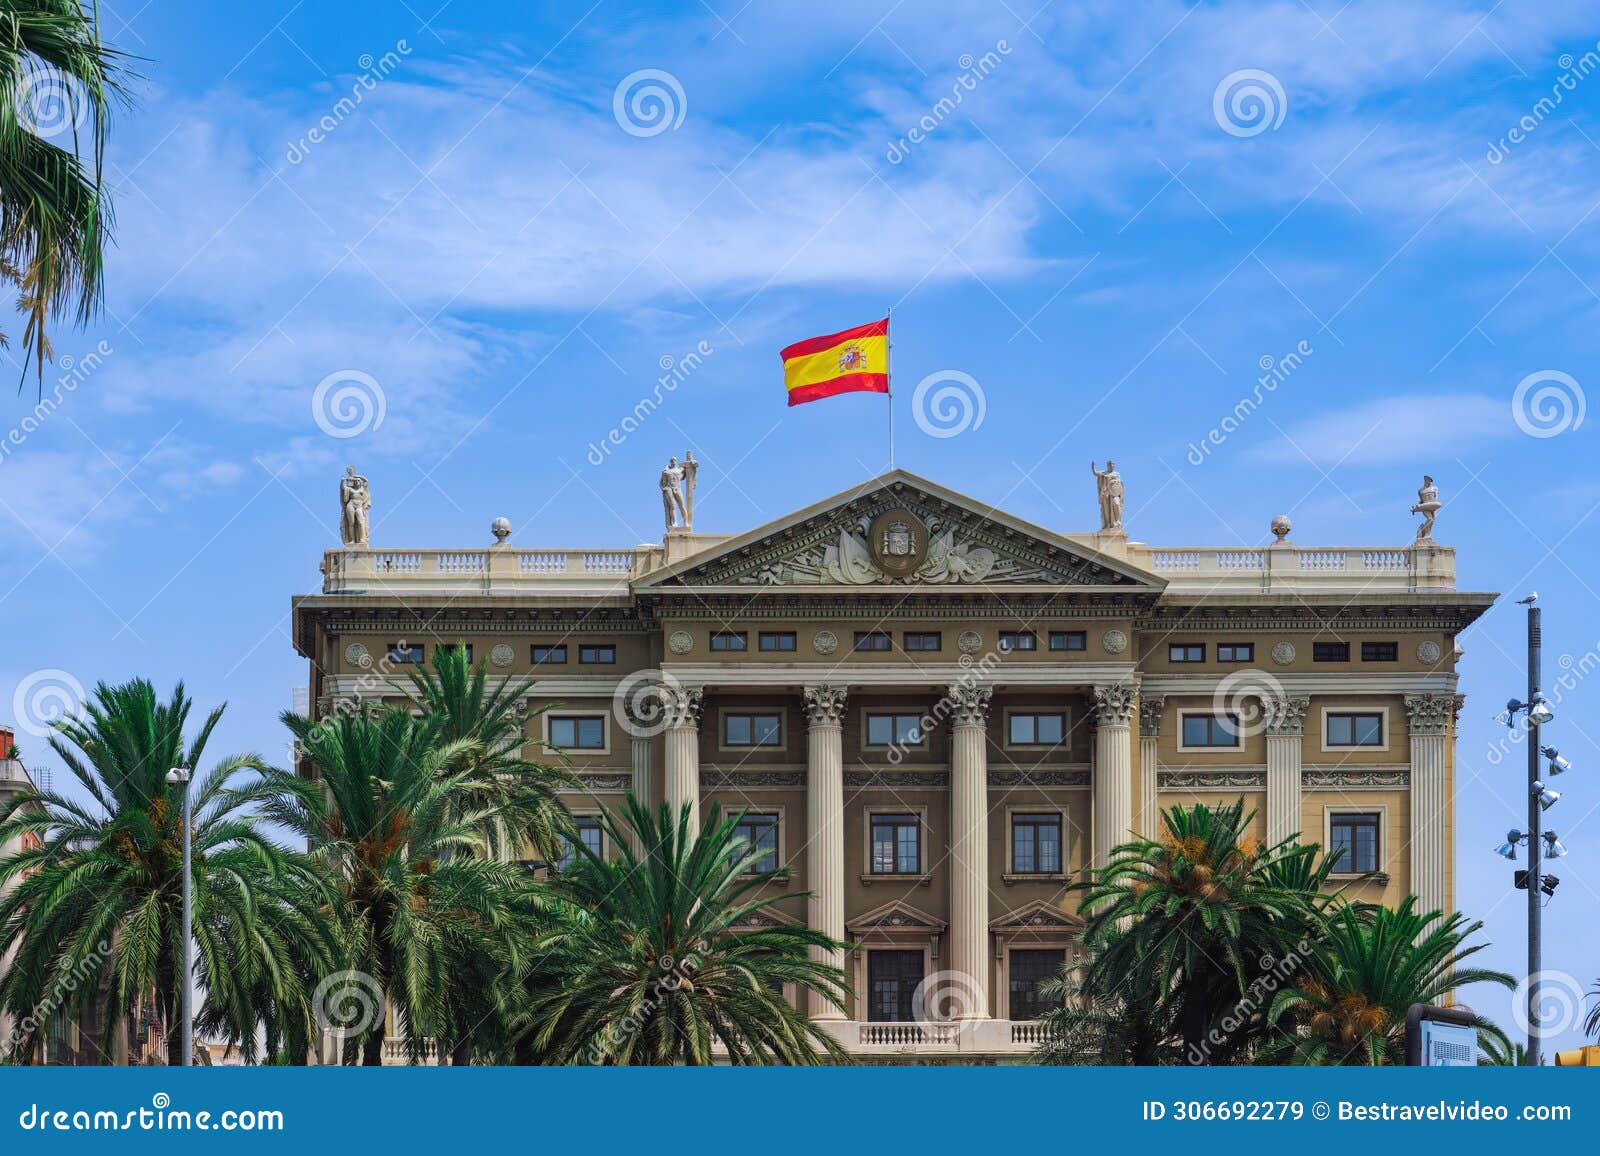 military government of barcelona neoclassical building - gobierno militar de barcelona -with spanish flag waving on top in